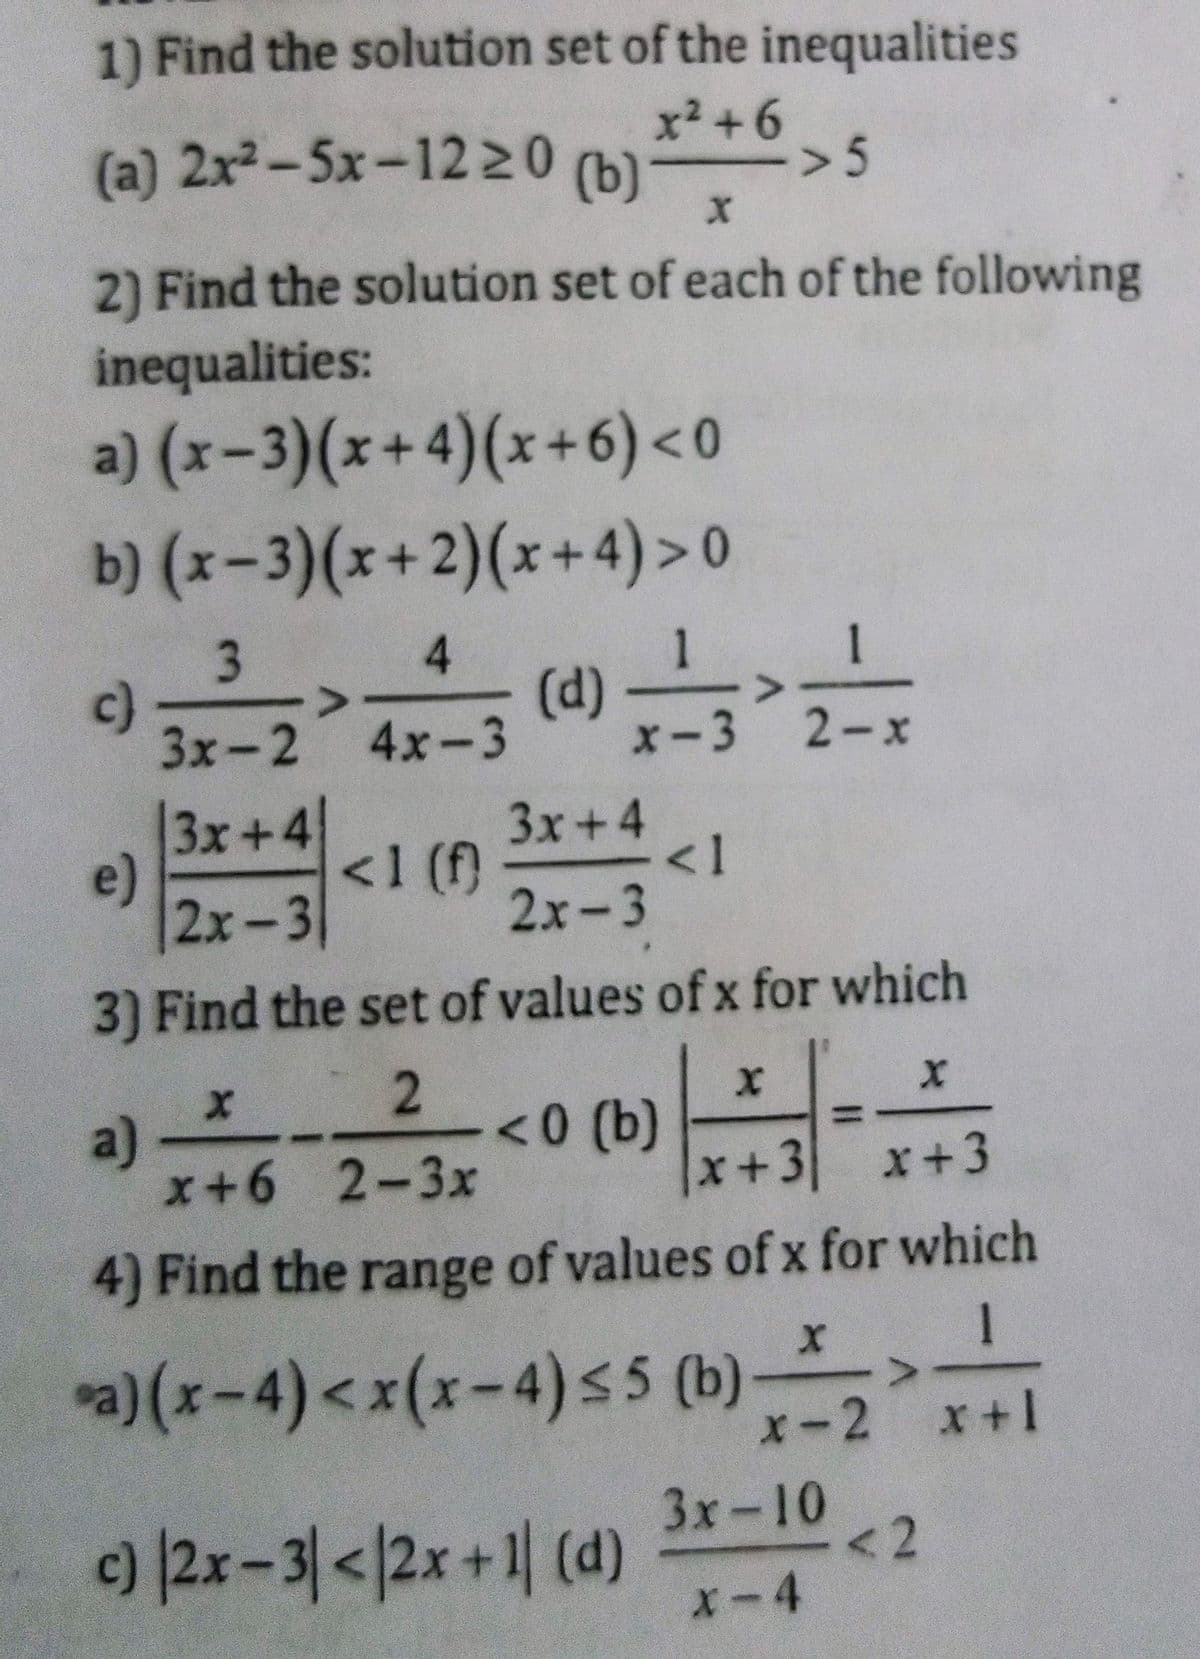 1) Find the solution set of the inequalities
x² +6
(a) 2x²-5x-1220
(b)
> 5
2) Find the solution set of each of the following
inequalities:
a) (x-3)(x+4)(x+6) <0
b) (x-3)(x+2)(x+4)> 0
4.
1
c)
<>
(d)
3x-2 4x-3
x-3
2-x
3x+4
3x+4
<1
2х-3
e)
<1(f)
2х-3
3) Find the set of values of x for which
a)
x+6 2-3x
2
<0 (b)
x+3 x+3
4) Find the range of values of x for which
1
)(x-4)<x(x-4)s5 (b)
X-2
x+1
)2x-31</2x+1| (d)
3x-10
<2
X-4
